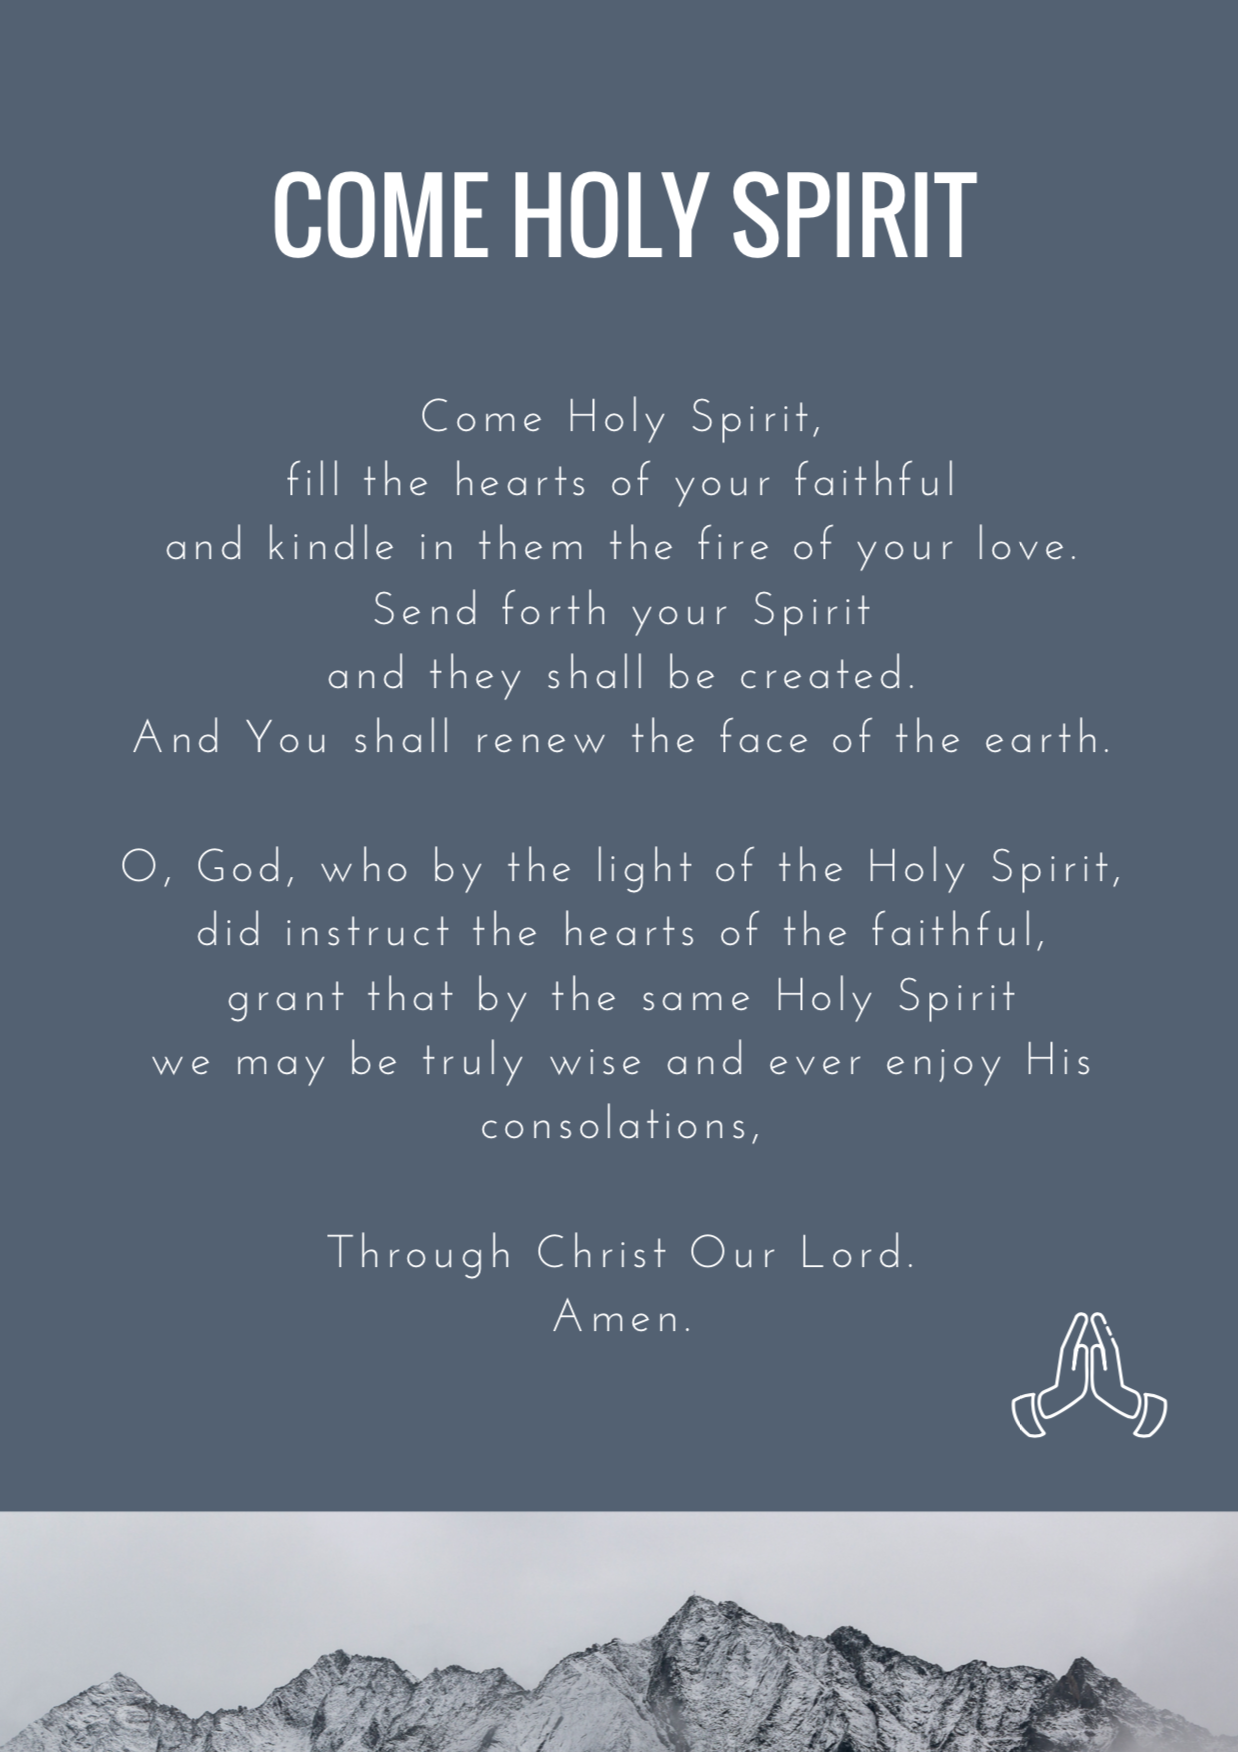 God Is Good - Come Holy Spirit.png